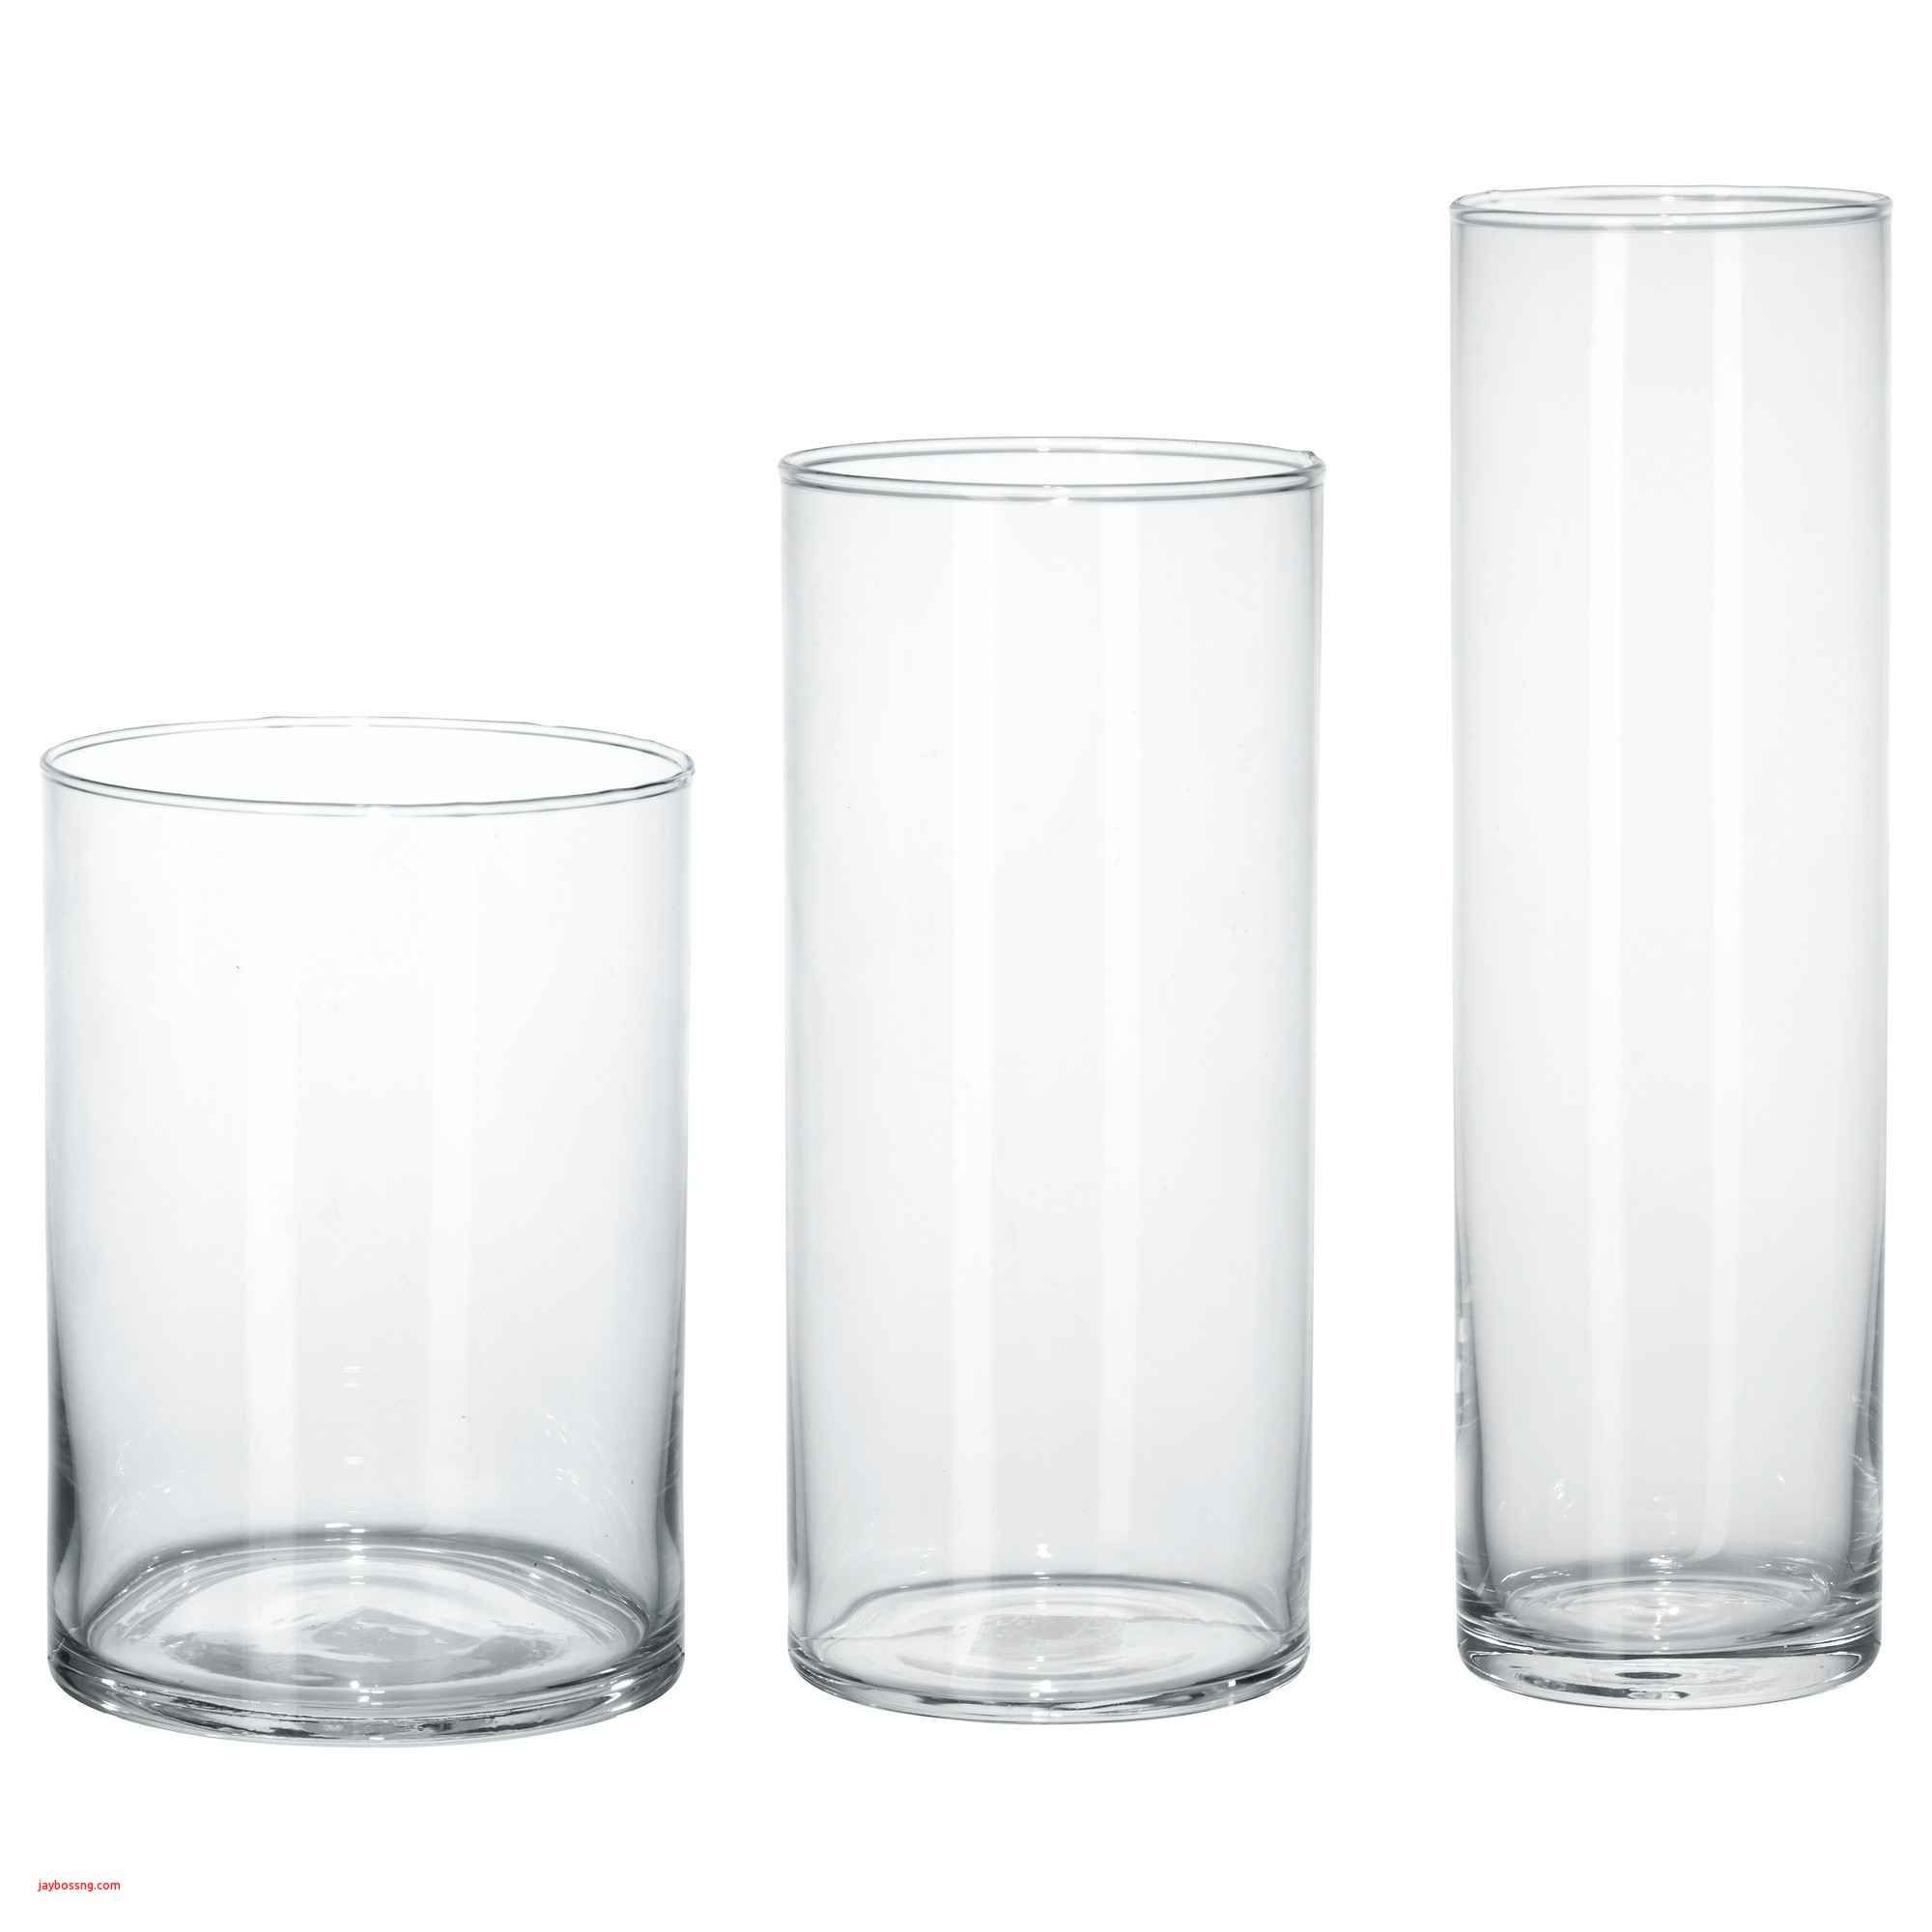 18 Great Tall Clear Glass Vases for Weddings 2024 free download tall clear glass vases for weddings of brown glass vase fresh ikea white table created pe s5h vases ikea with brown glass vase fresh ikea white table created pe s5h vases ikea vase i 0d blad